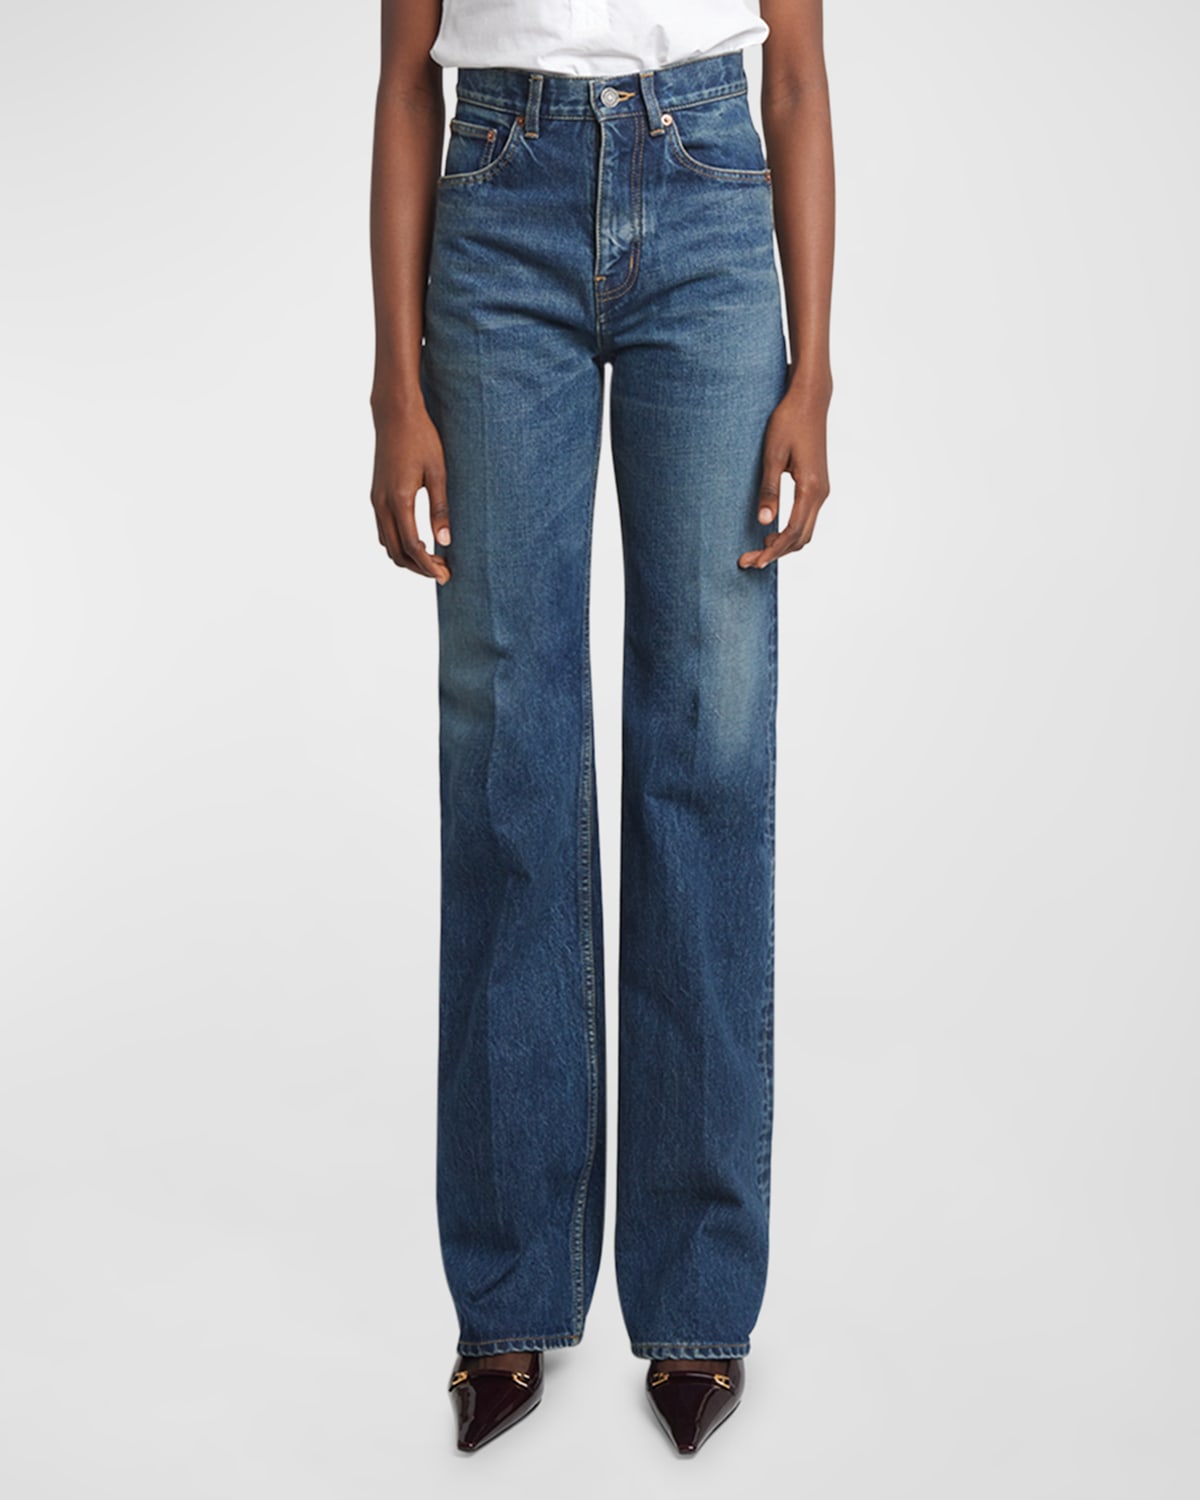 Neo Clyde High-Rise Straight-Leg Jeans